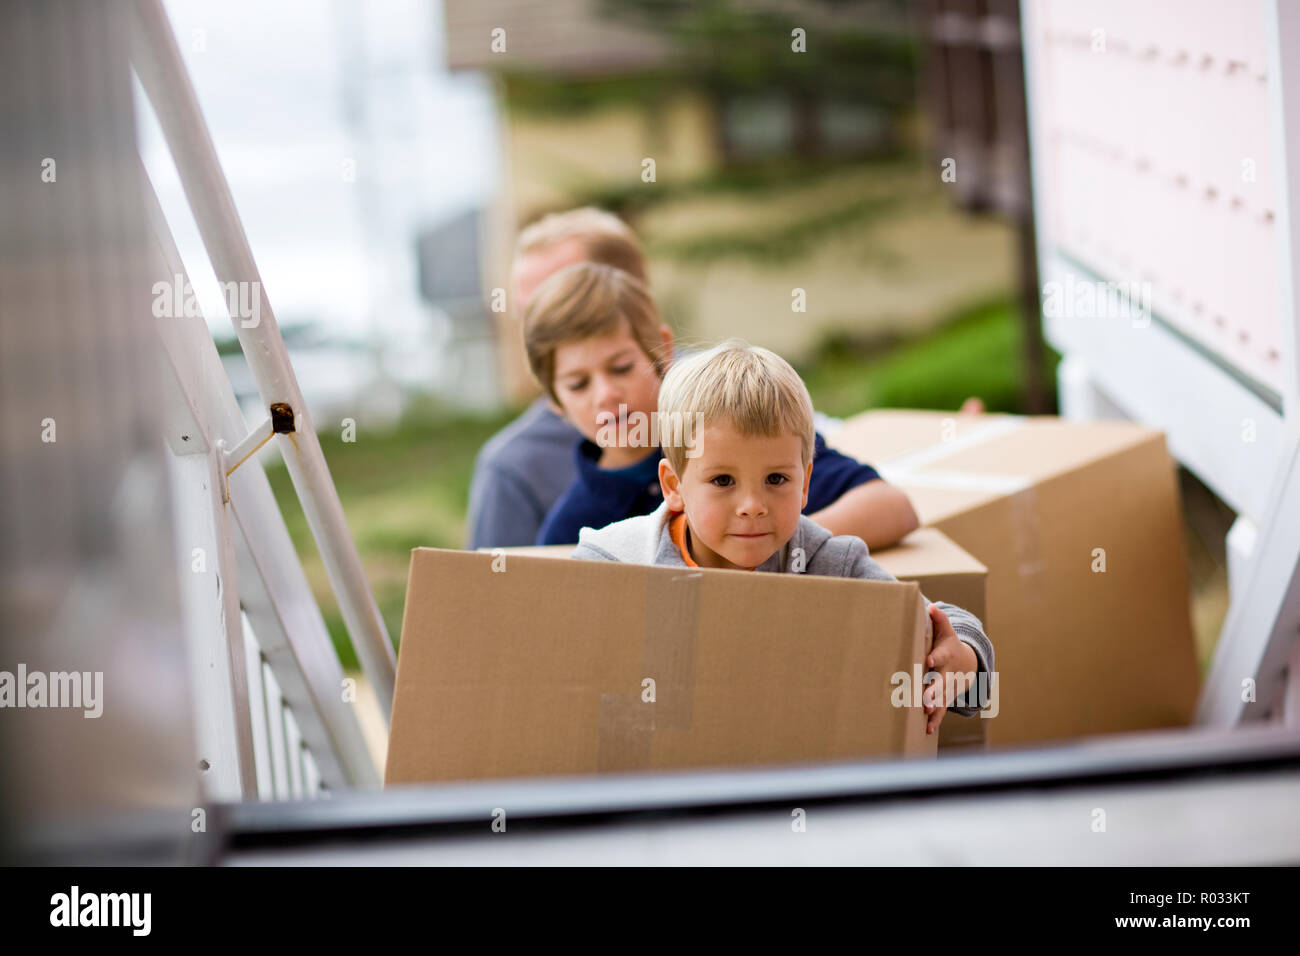 Young boy carrying boxes with his brother into a house. Stock Photo